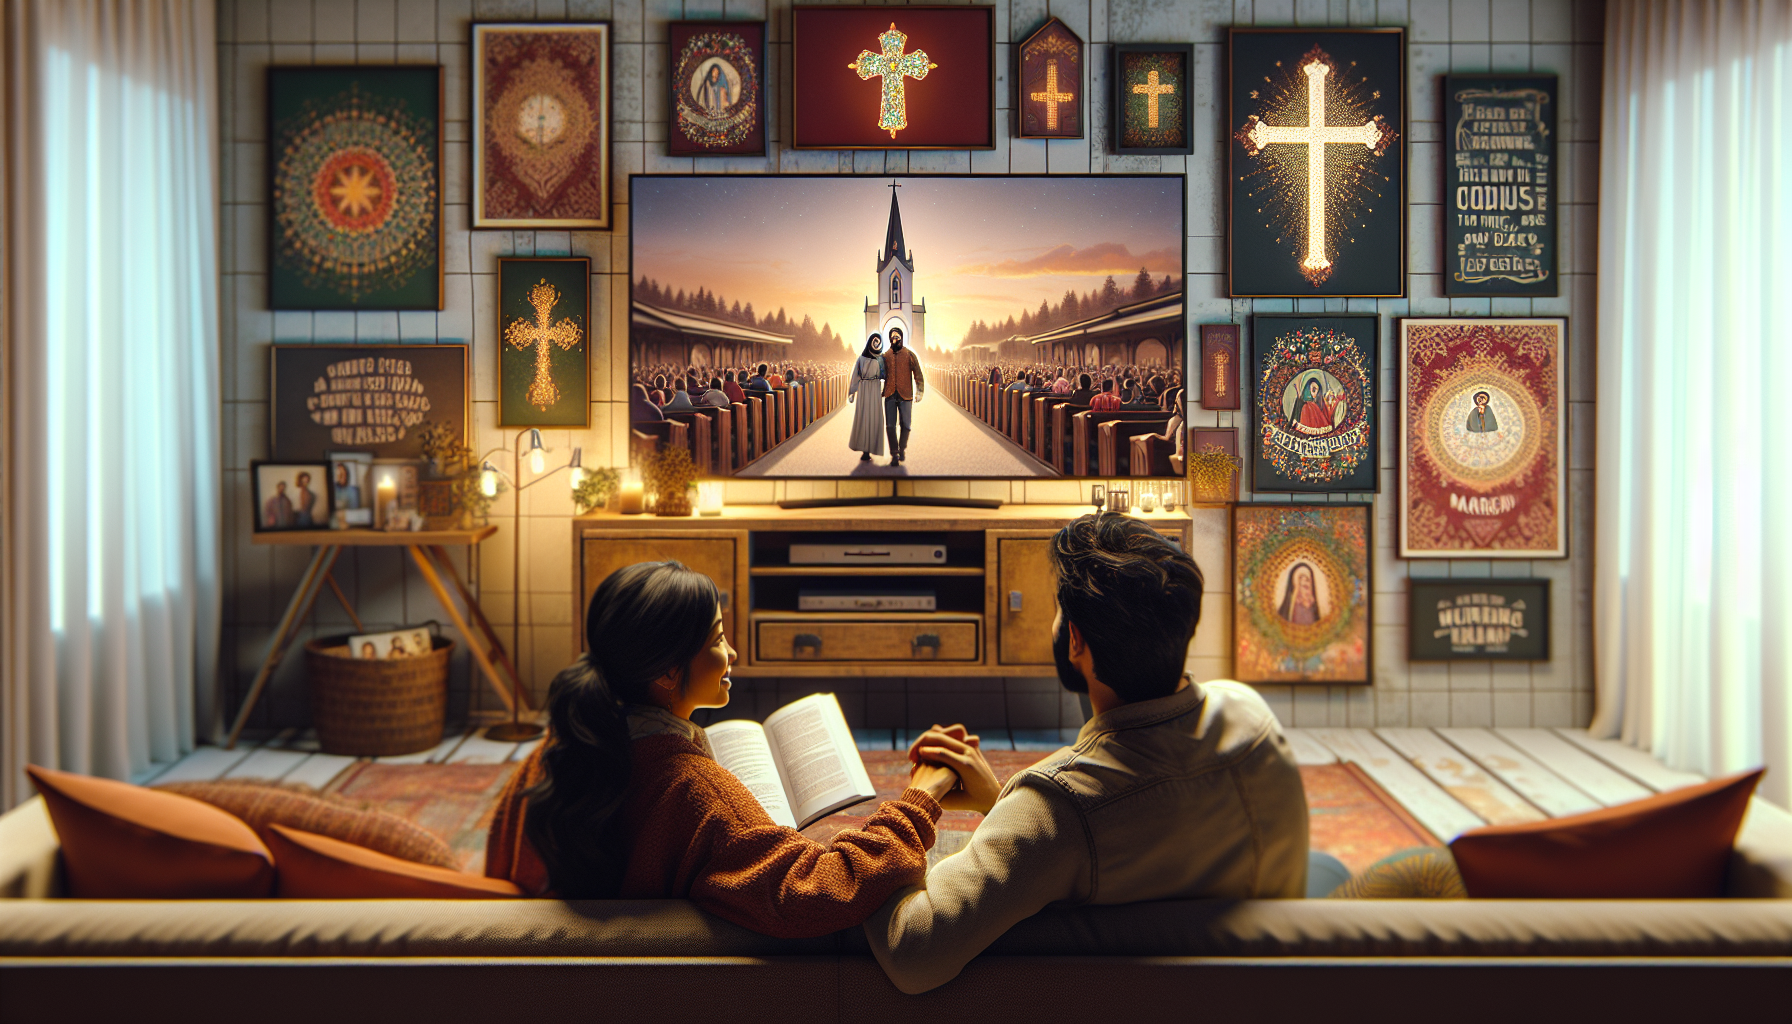 An illustration of a couple watching a Christian movie in a cozy living room. The background features framed pictures of cross symbols and inspirational quotes. The television shows a heartwarming sce